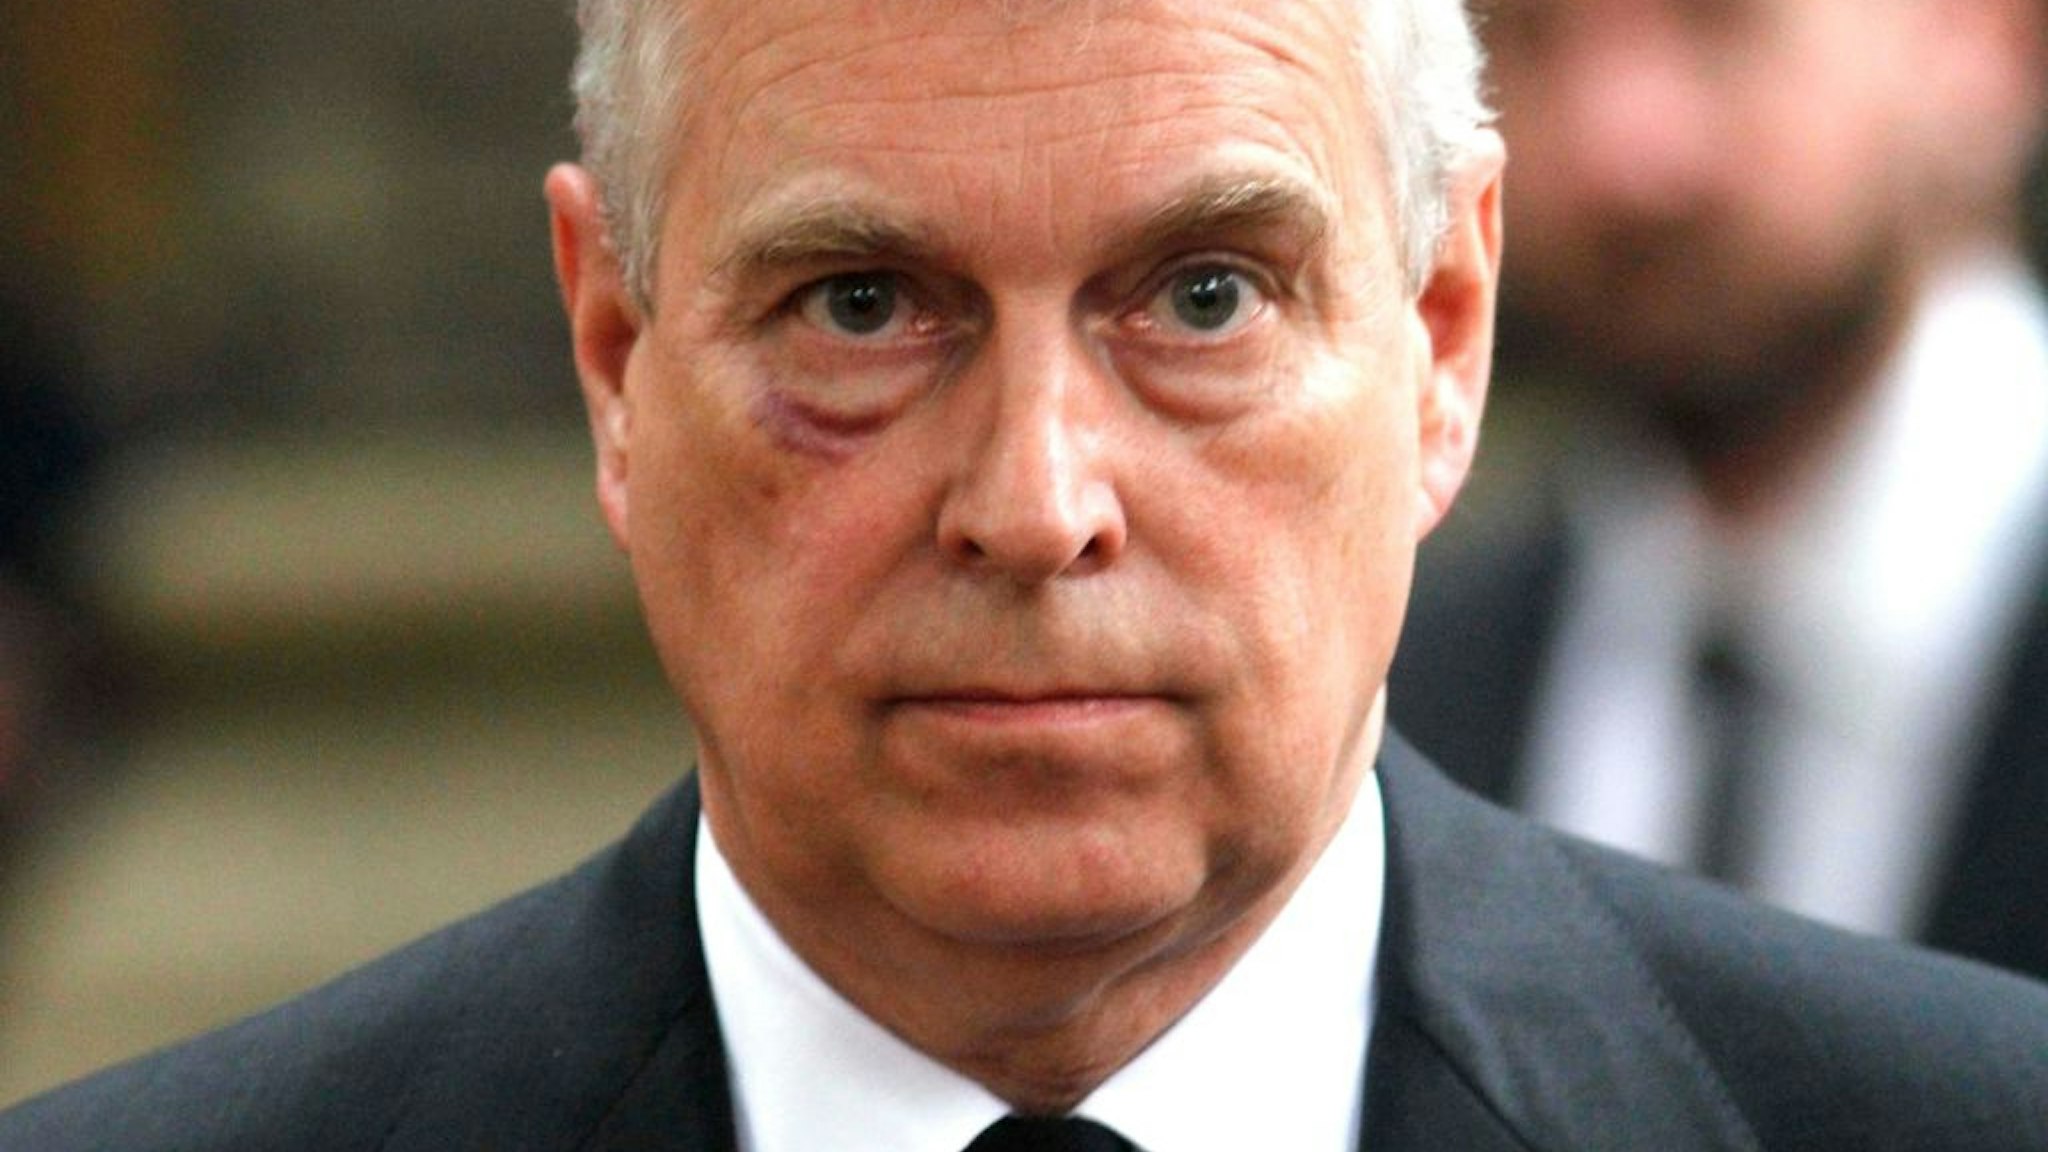 LONDON, UNITED KINGDOM - JUNE 27: Prince Andrew, Duke of York leaves the funeral service of Patricia Knatchbull, Countess Mountbatten of Burma at St Paul's Church in Knightsbridge on June 27, 2017 in London, England. (Photo Mark Richards - WPA Pool / Getty Images)